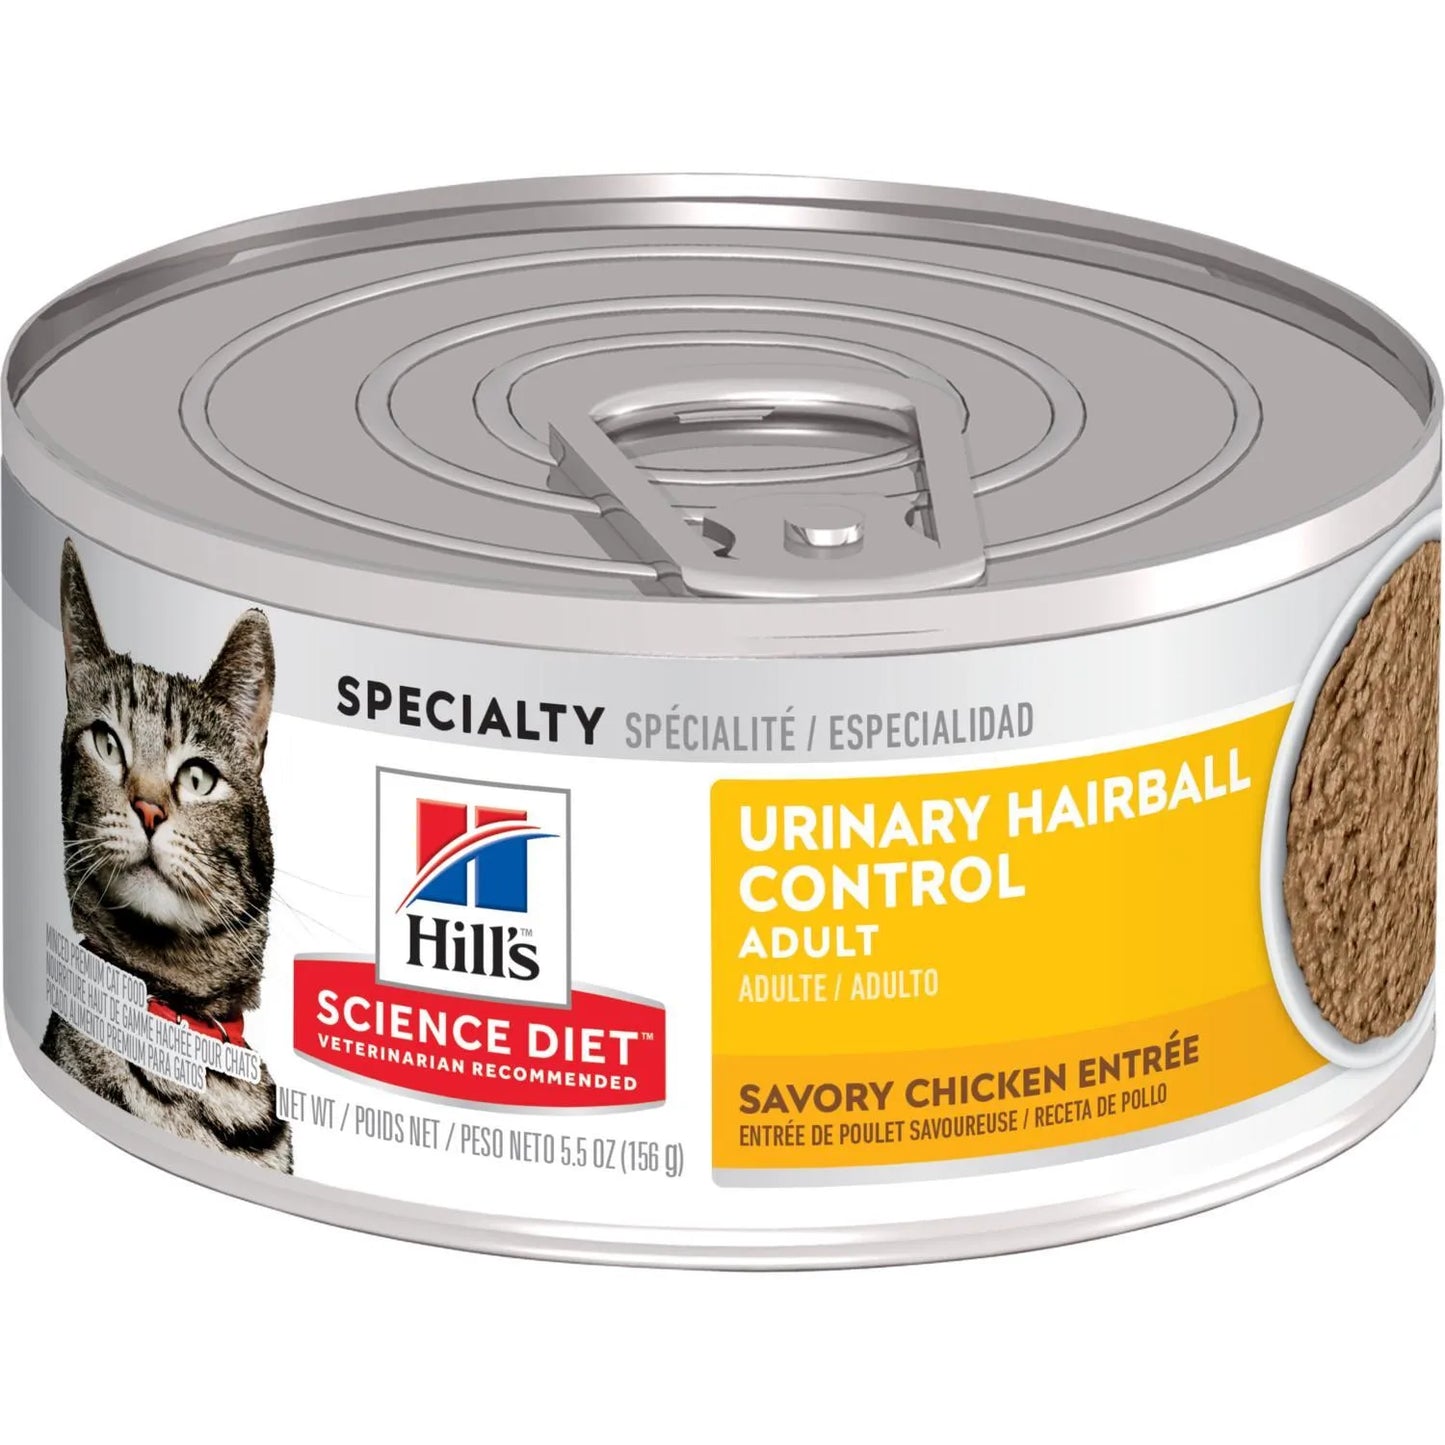 Hill's™ Science Diet™ Adult Urinary Hairball Control Savory Chicken Entrée, 2.9-oz Case of 24